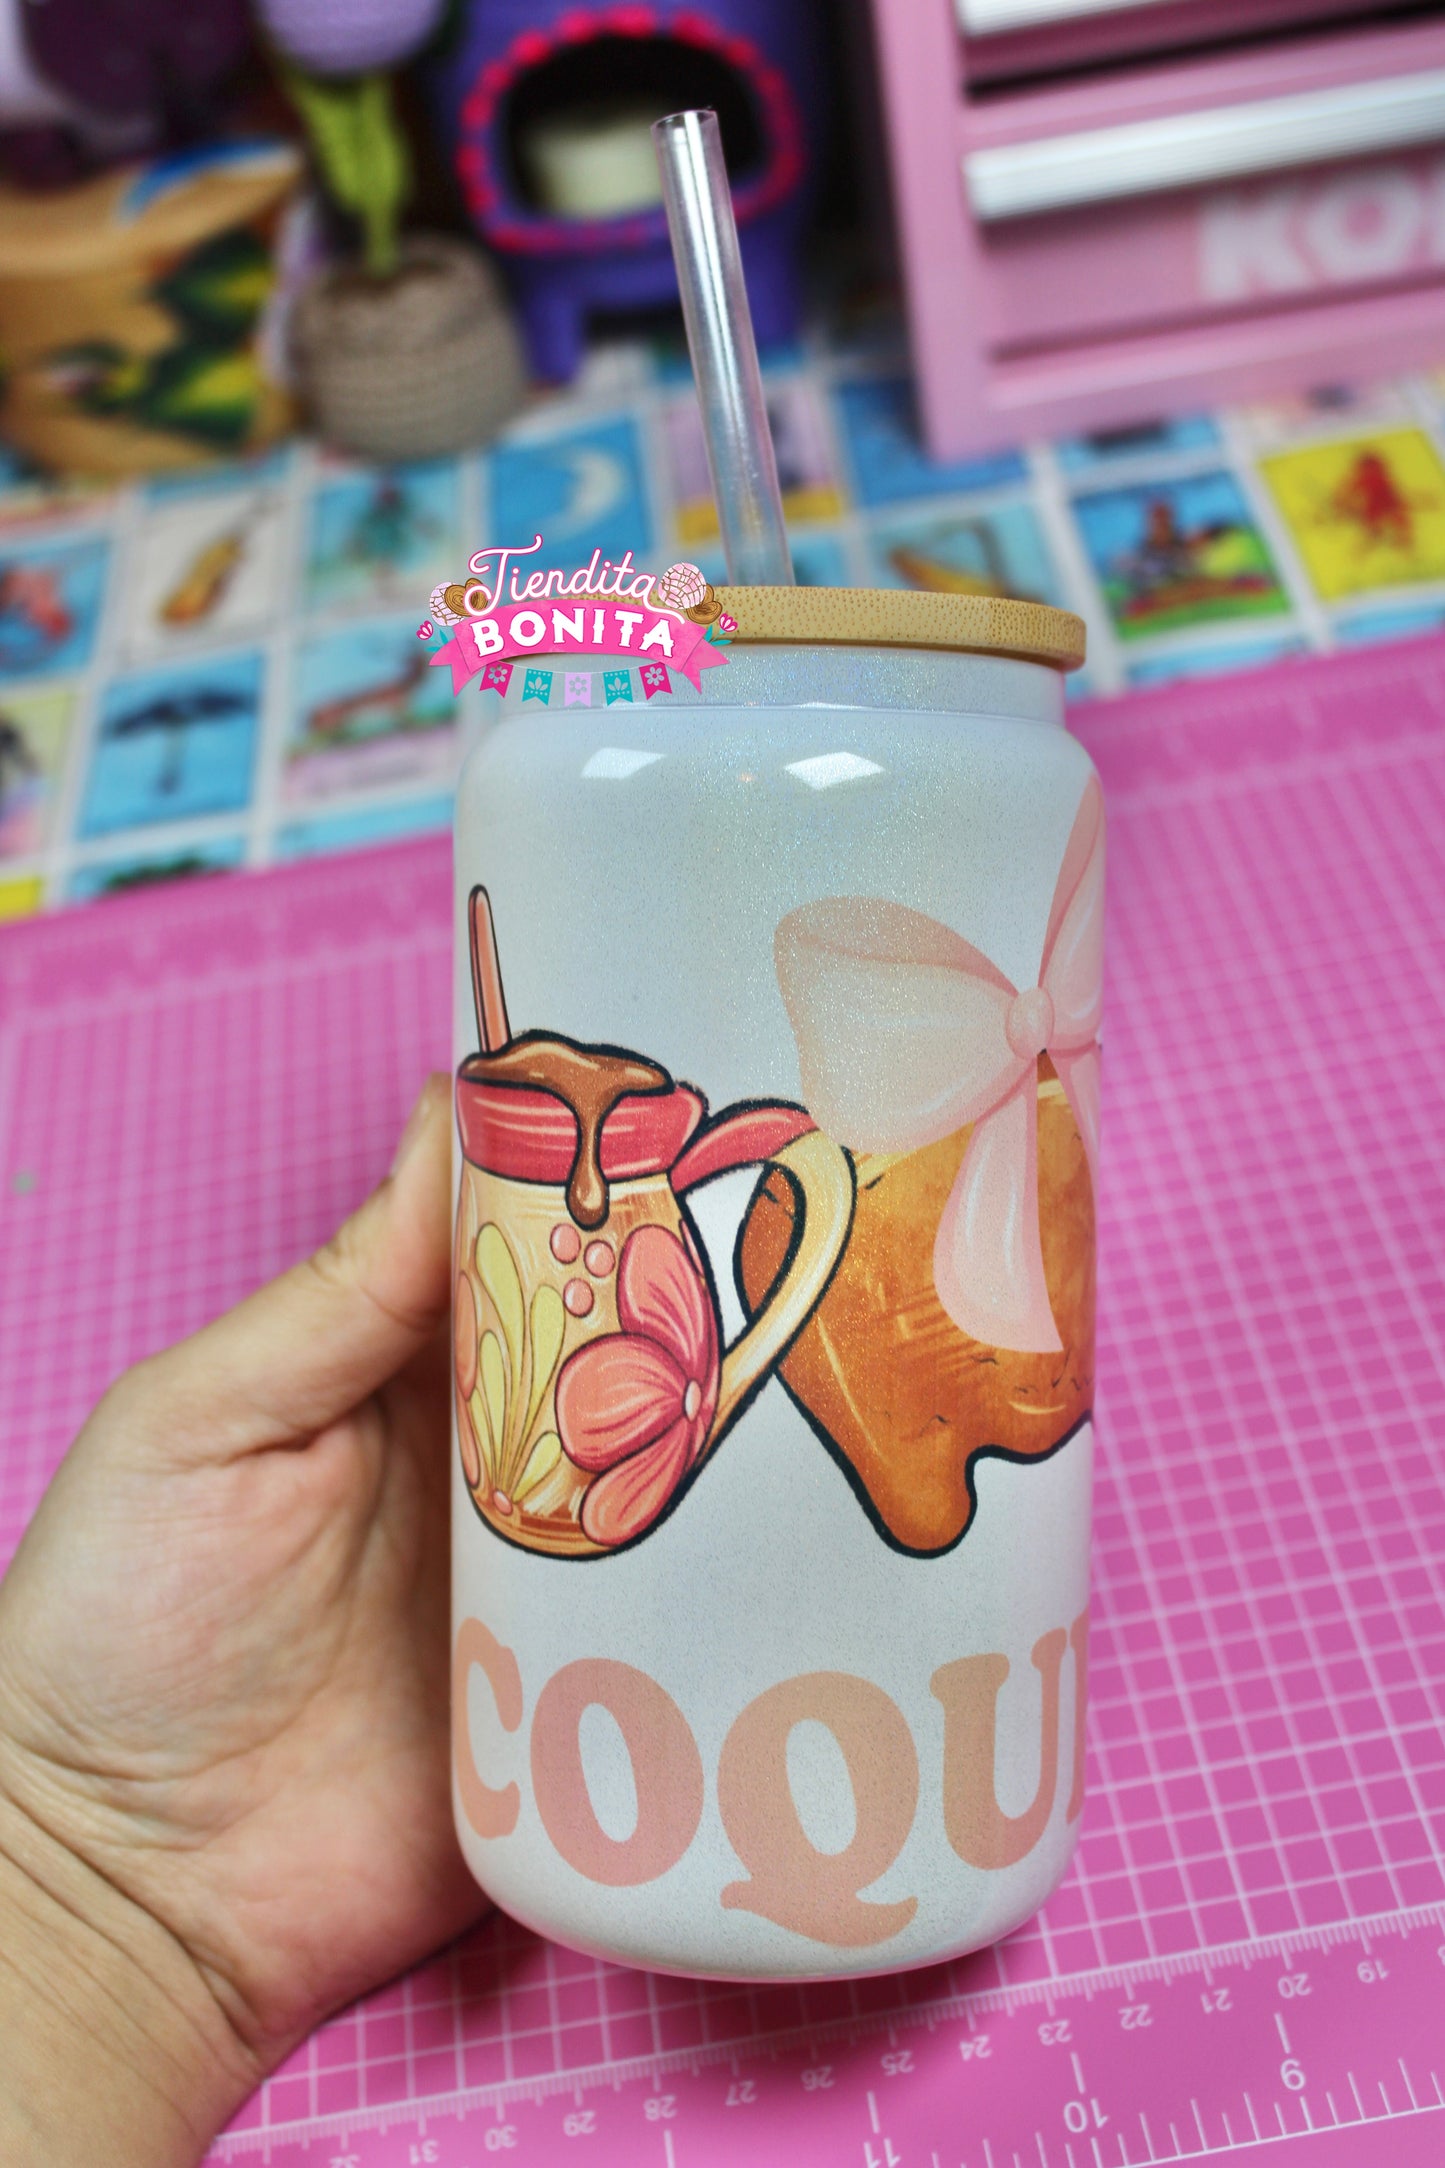 Coquette pan dulce glass can